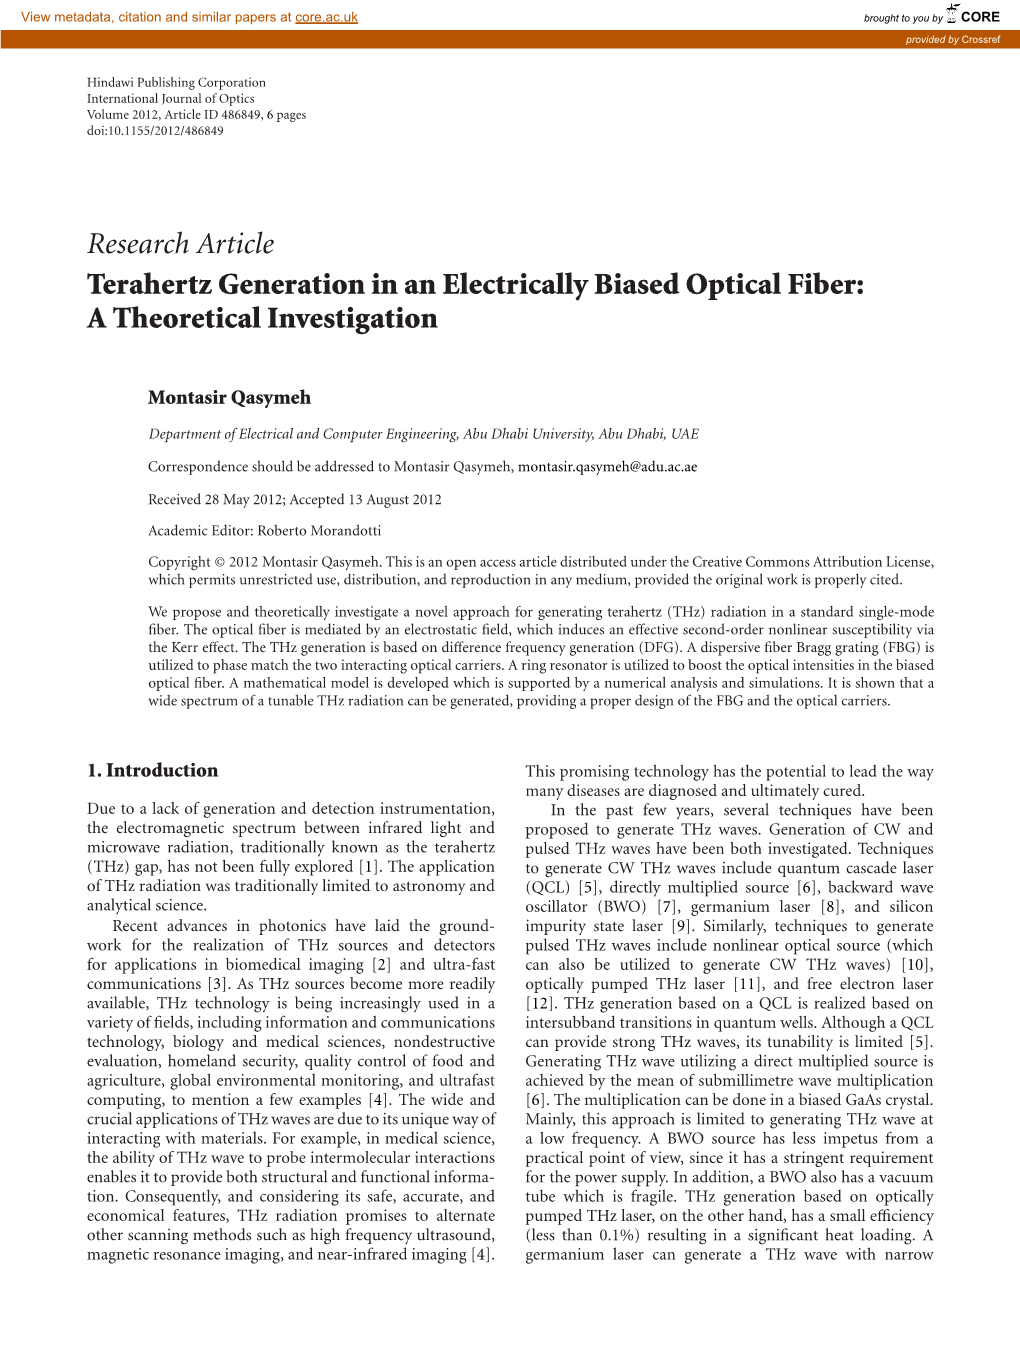 Research Article Terahertz Generation in an Electrically Biased Optical Fiber: a Theoretical Investigation